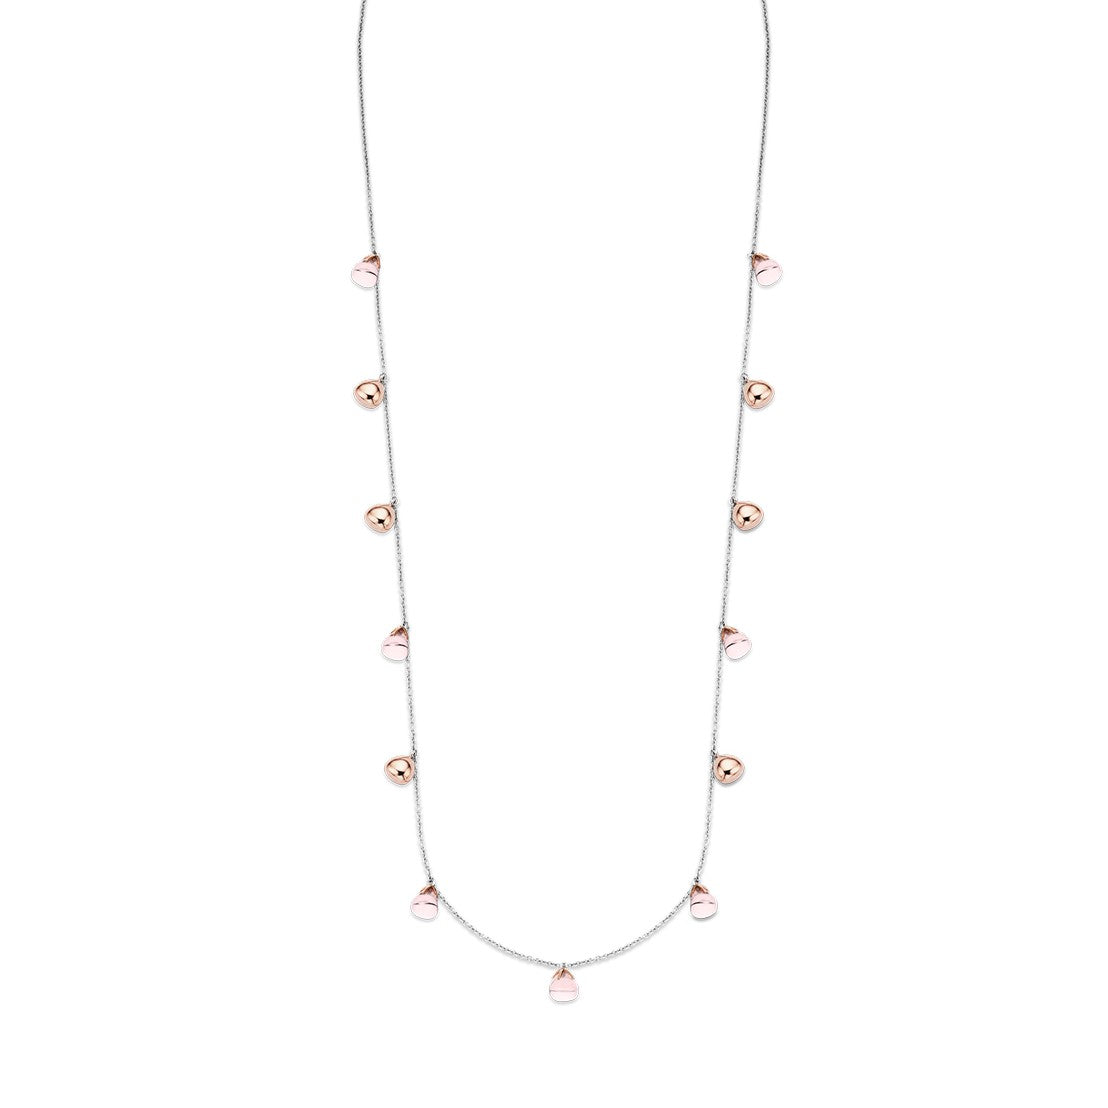 TI SENTO Sterling Silver Necklace with Pink and Rose Teardrop Charms